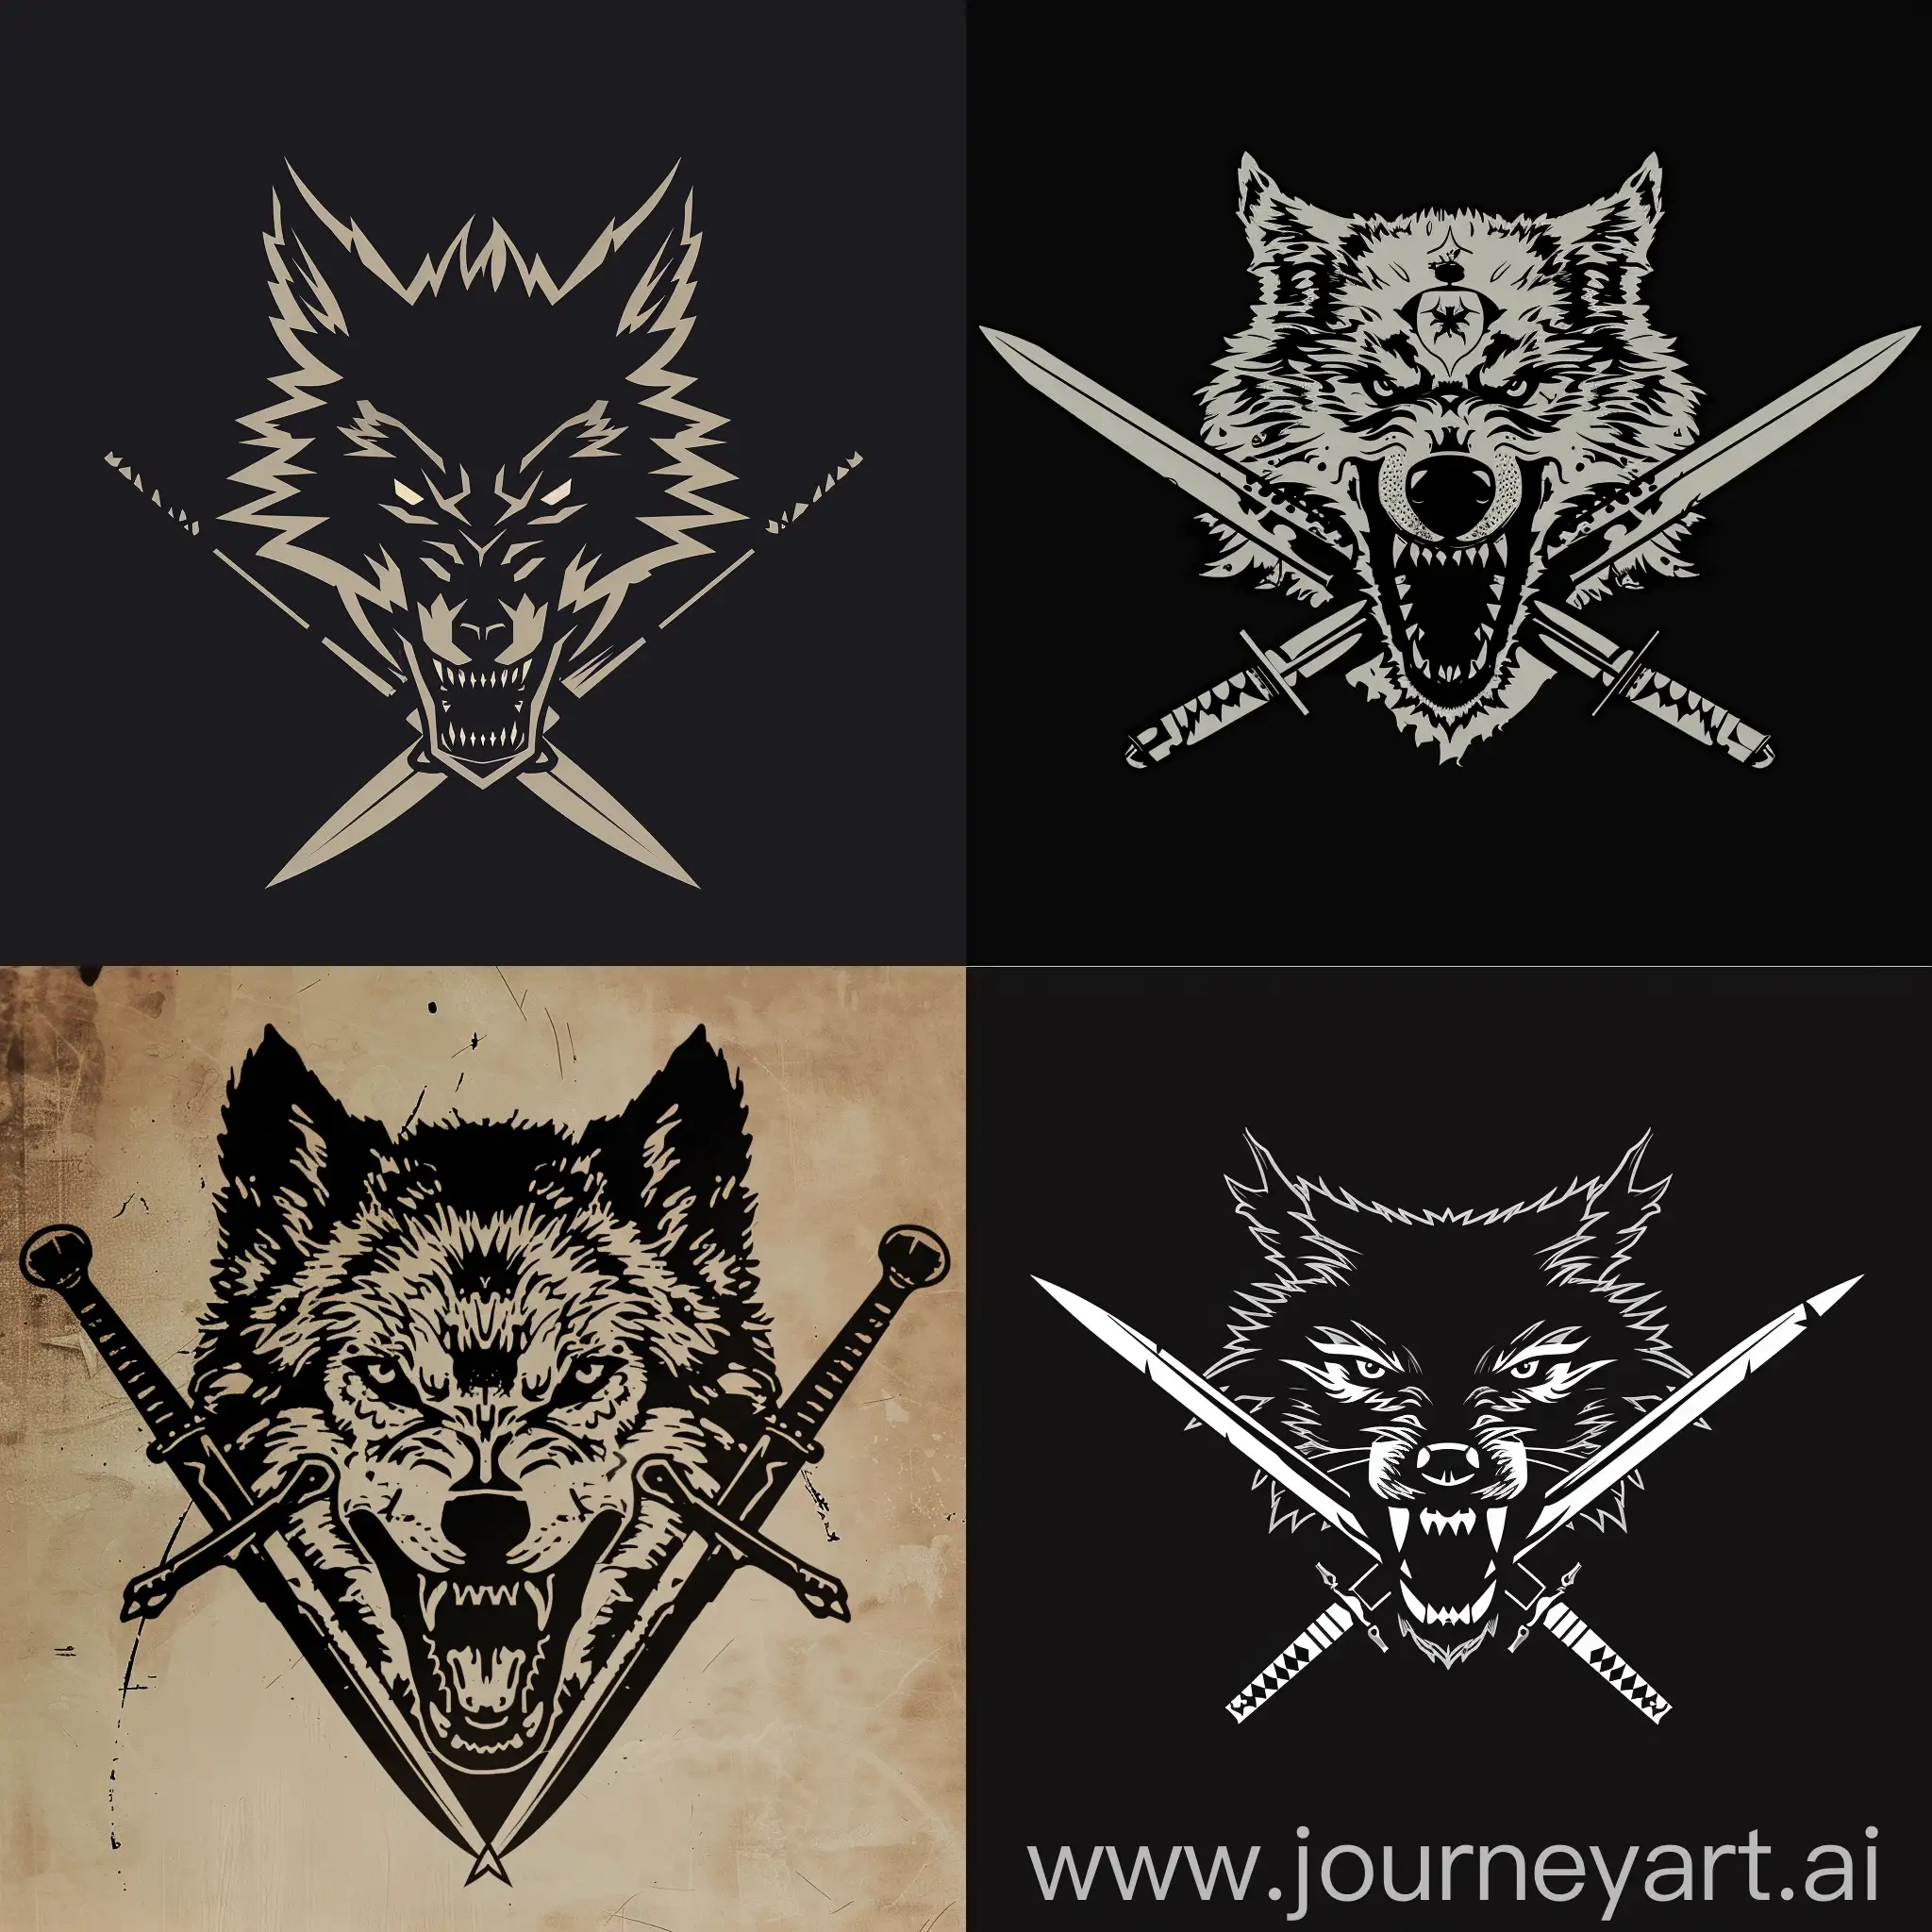 Fierce-Wolf-Emblem-with-Crossed-Swords-Logo-for-Military-Tactical-Company